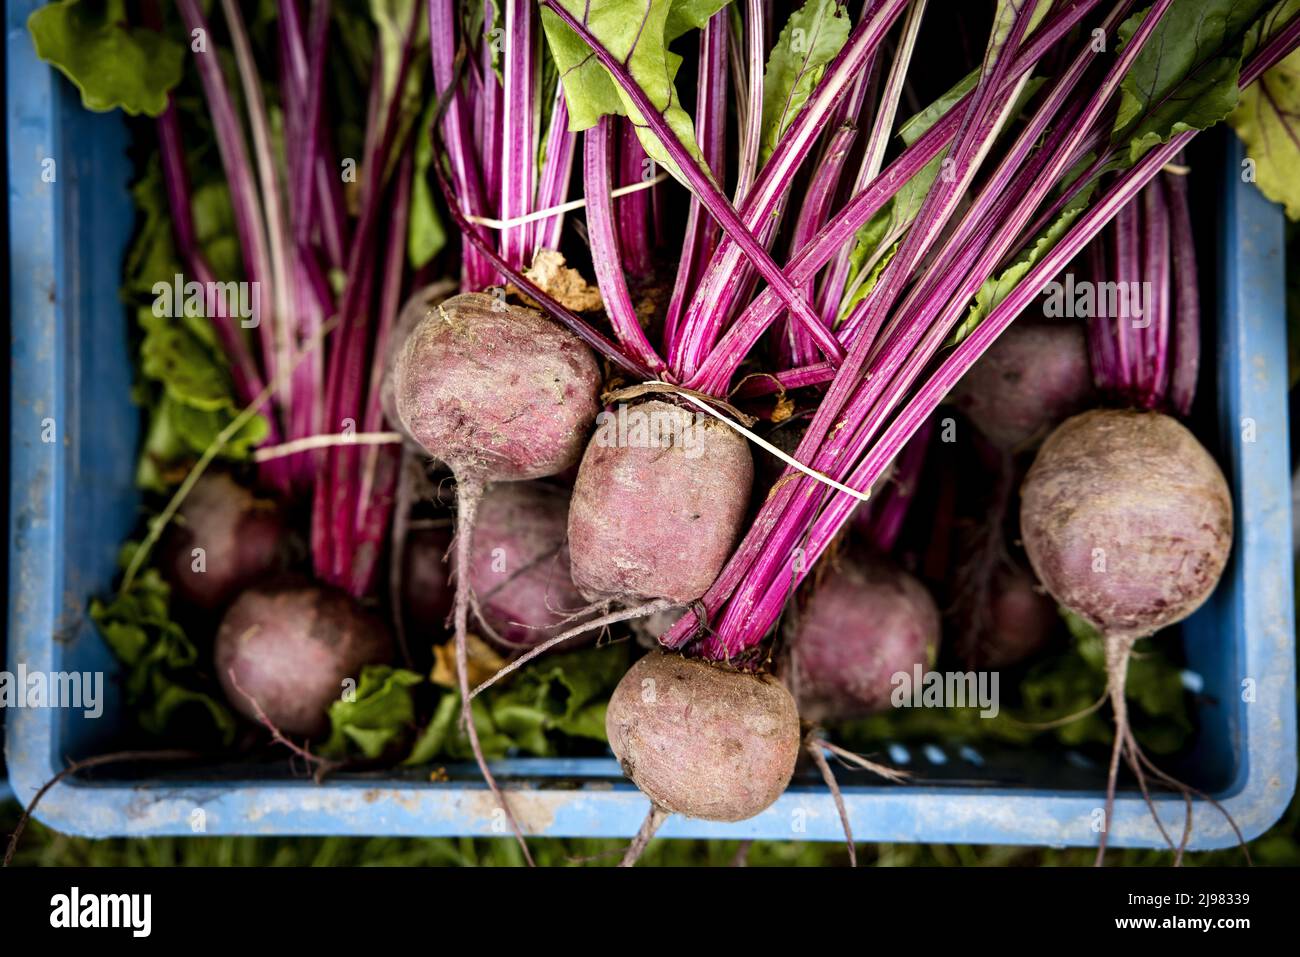 2022-05-21 10:46:06 UTRECHT - Red beets at a market stall on Koningshof where locally grown products are sold that have been grown in a sustainable way. ANP RAMON VAN FLYMEN netherlands out - belgium out Stock Photo